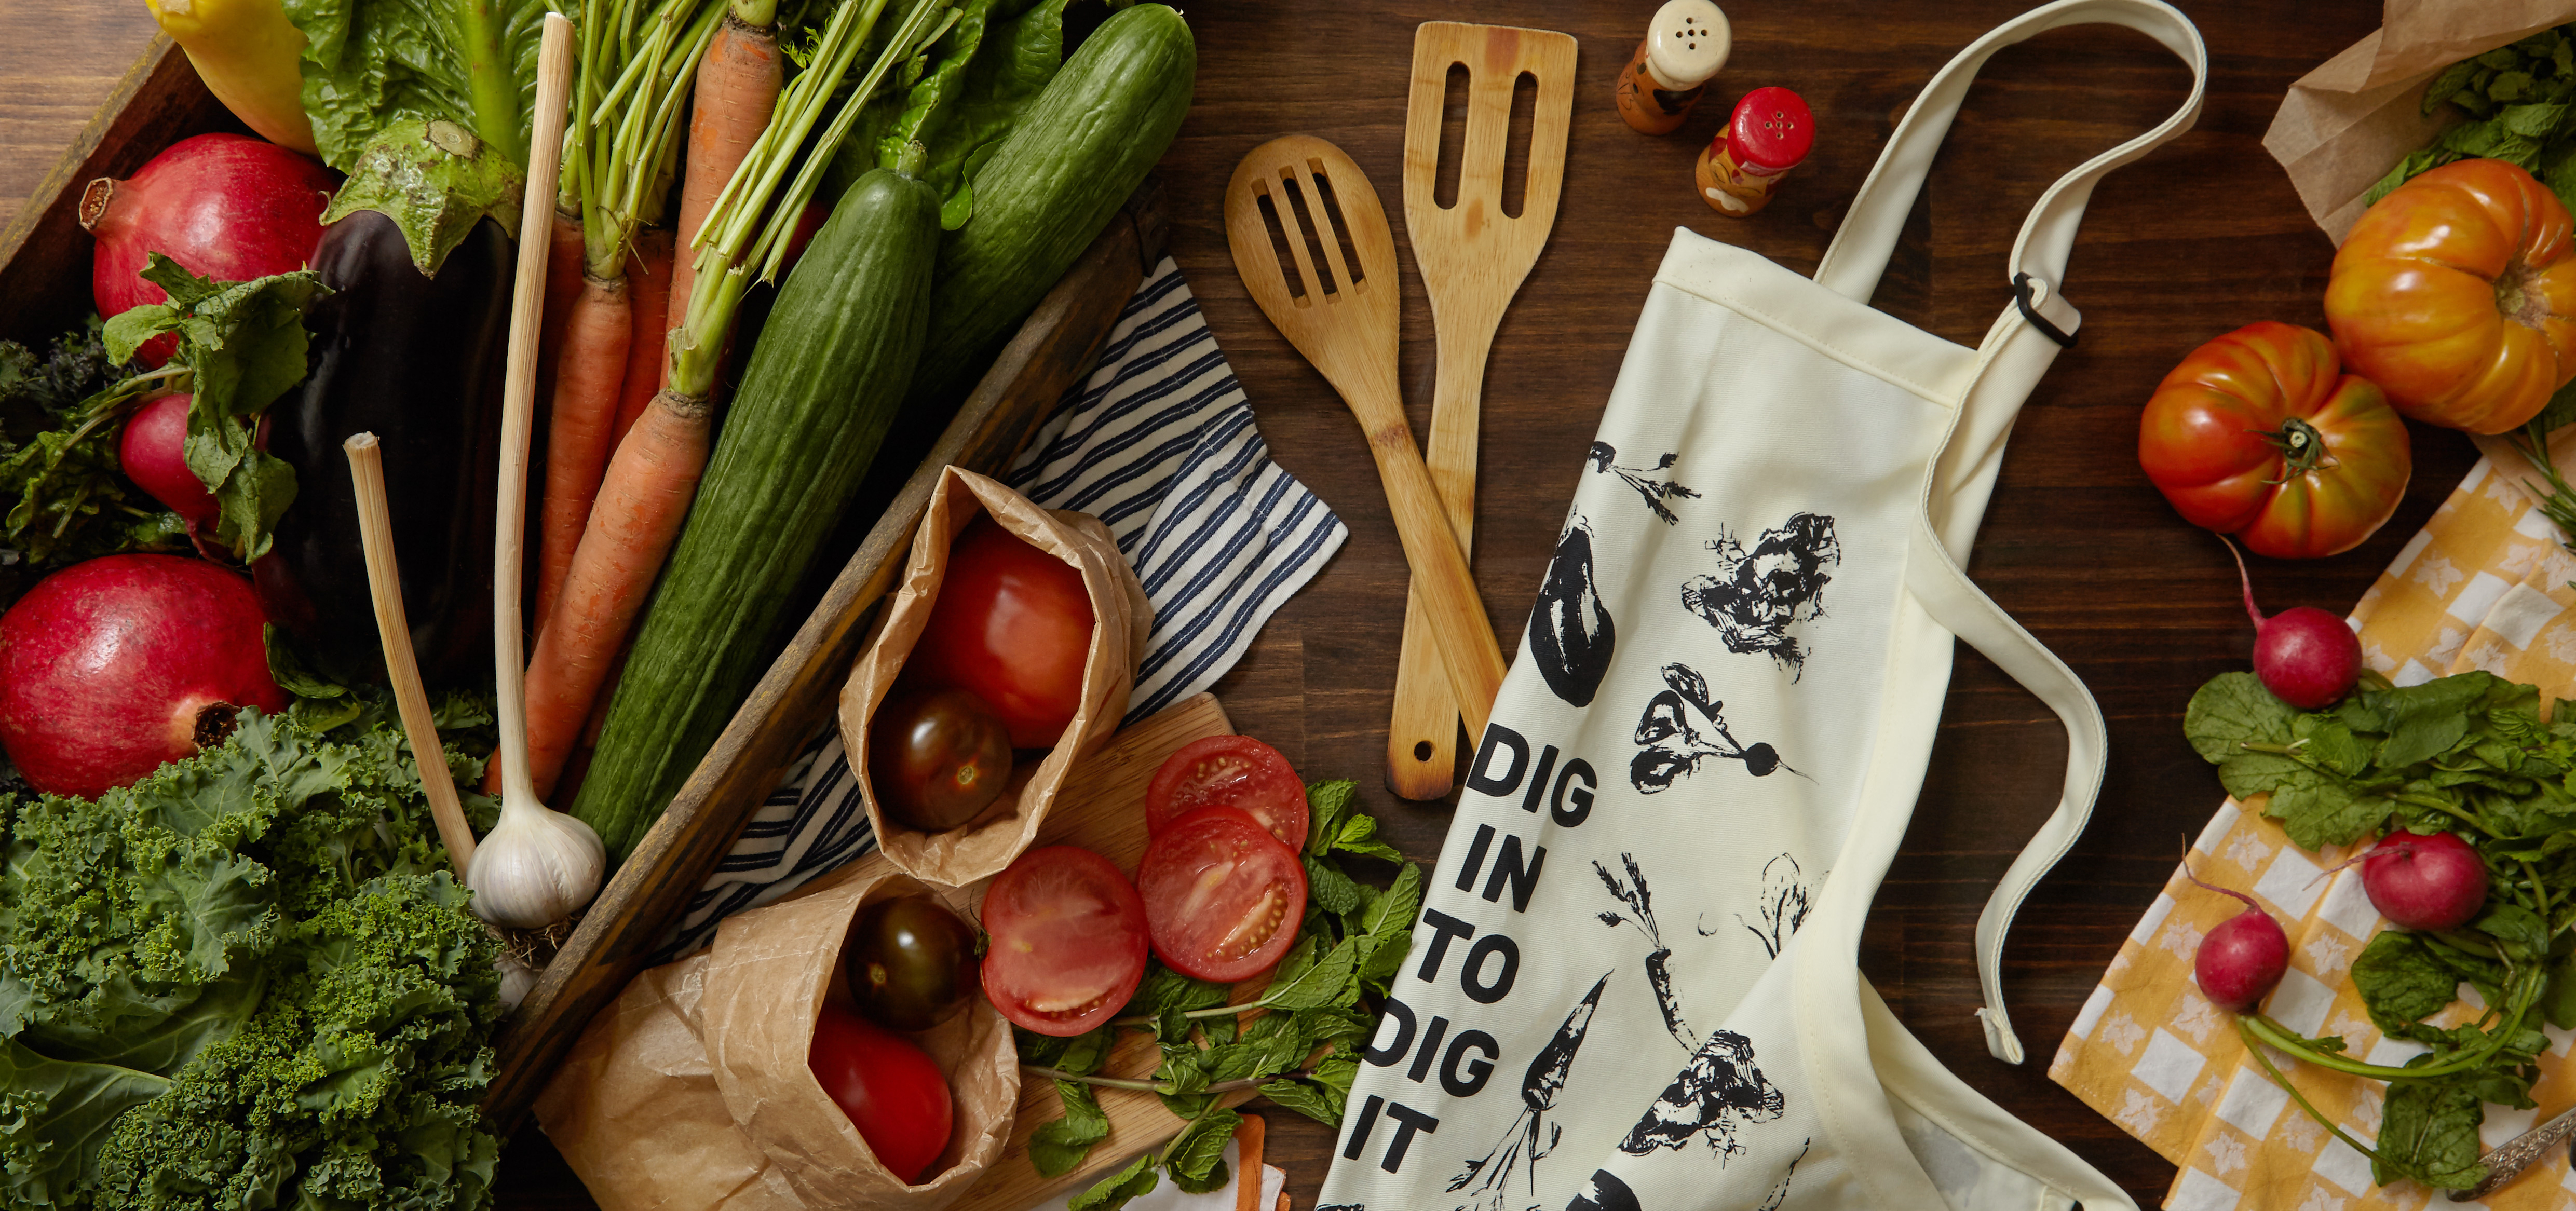 The "Food for Thought, Food for Life" collection will also feature a cotton twill apron that reads "Dig in to Dit it." 